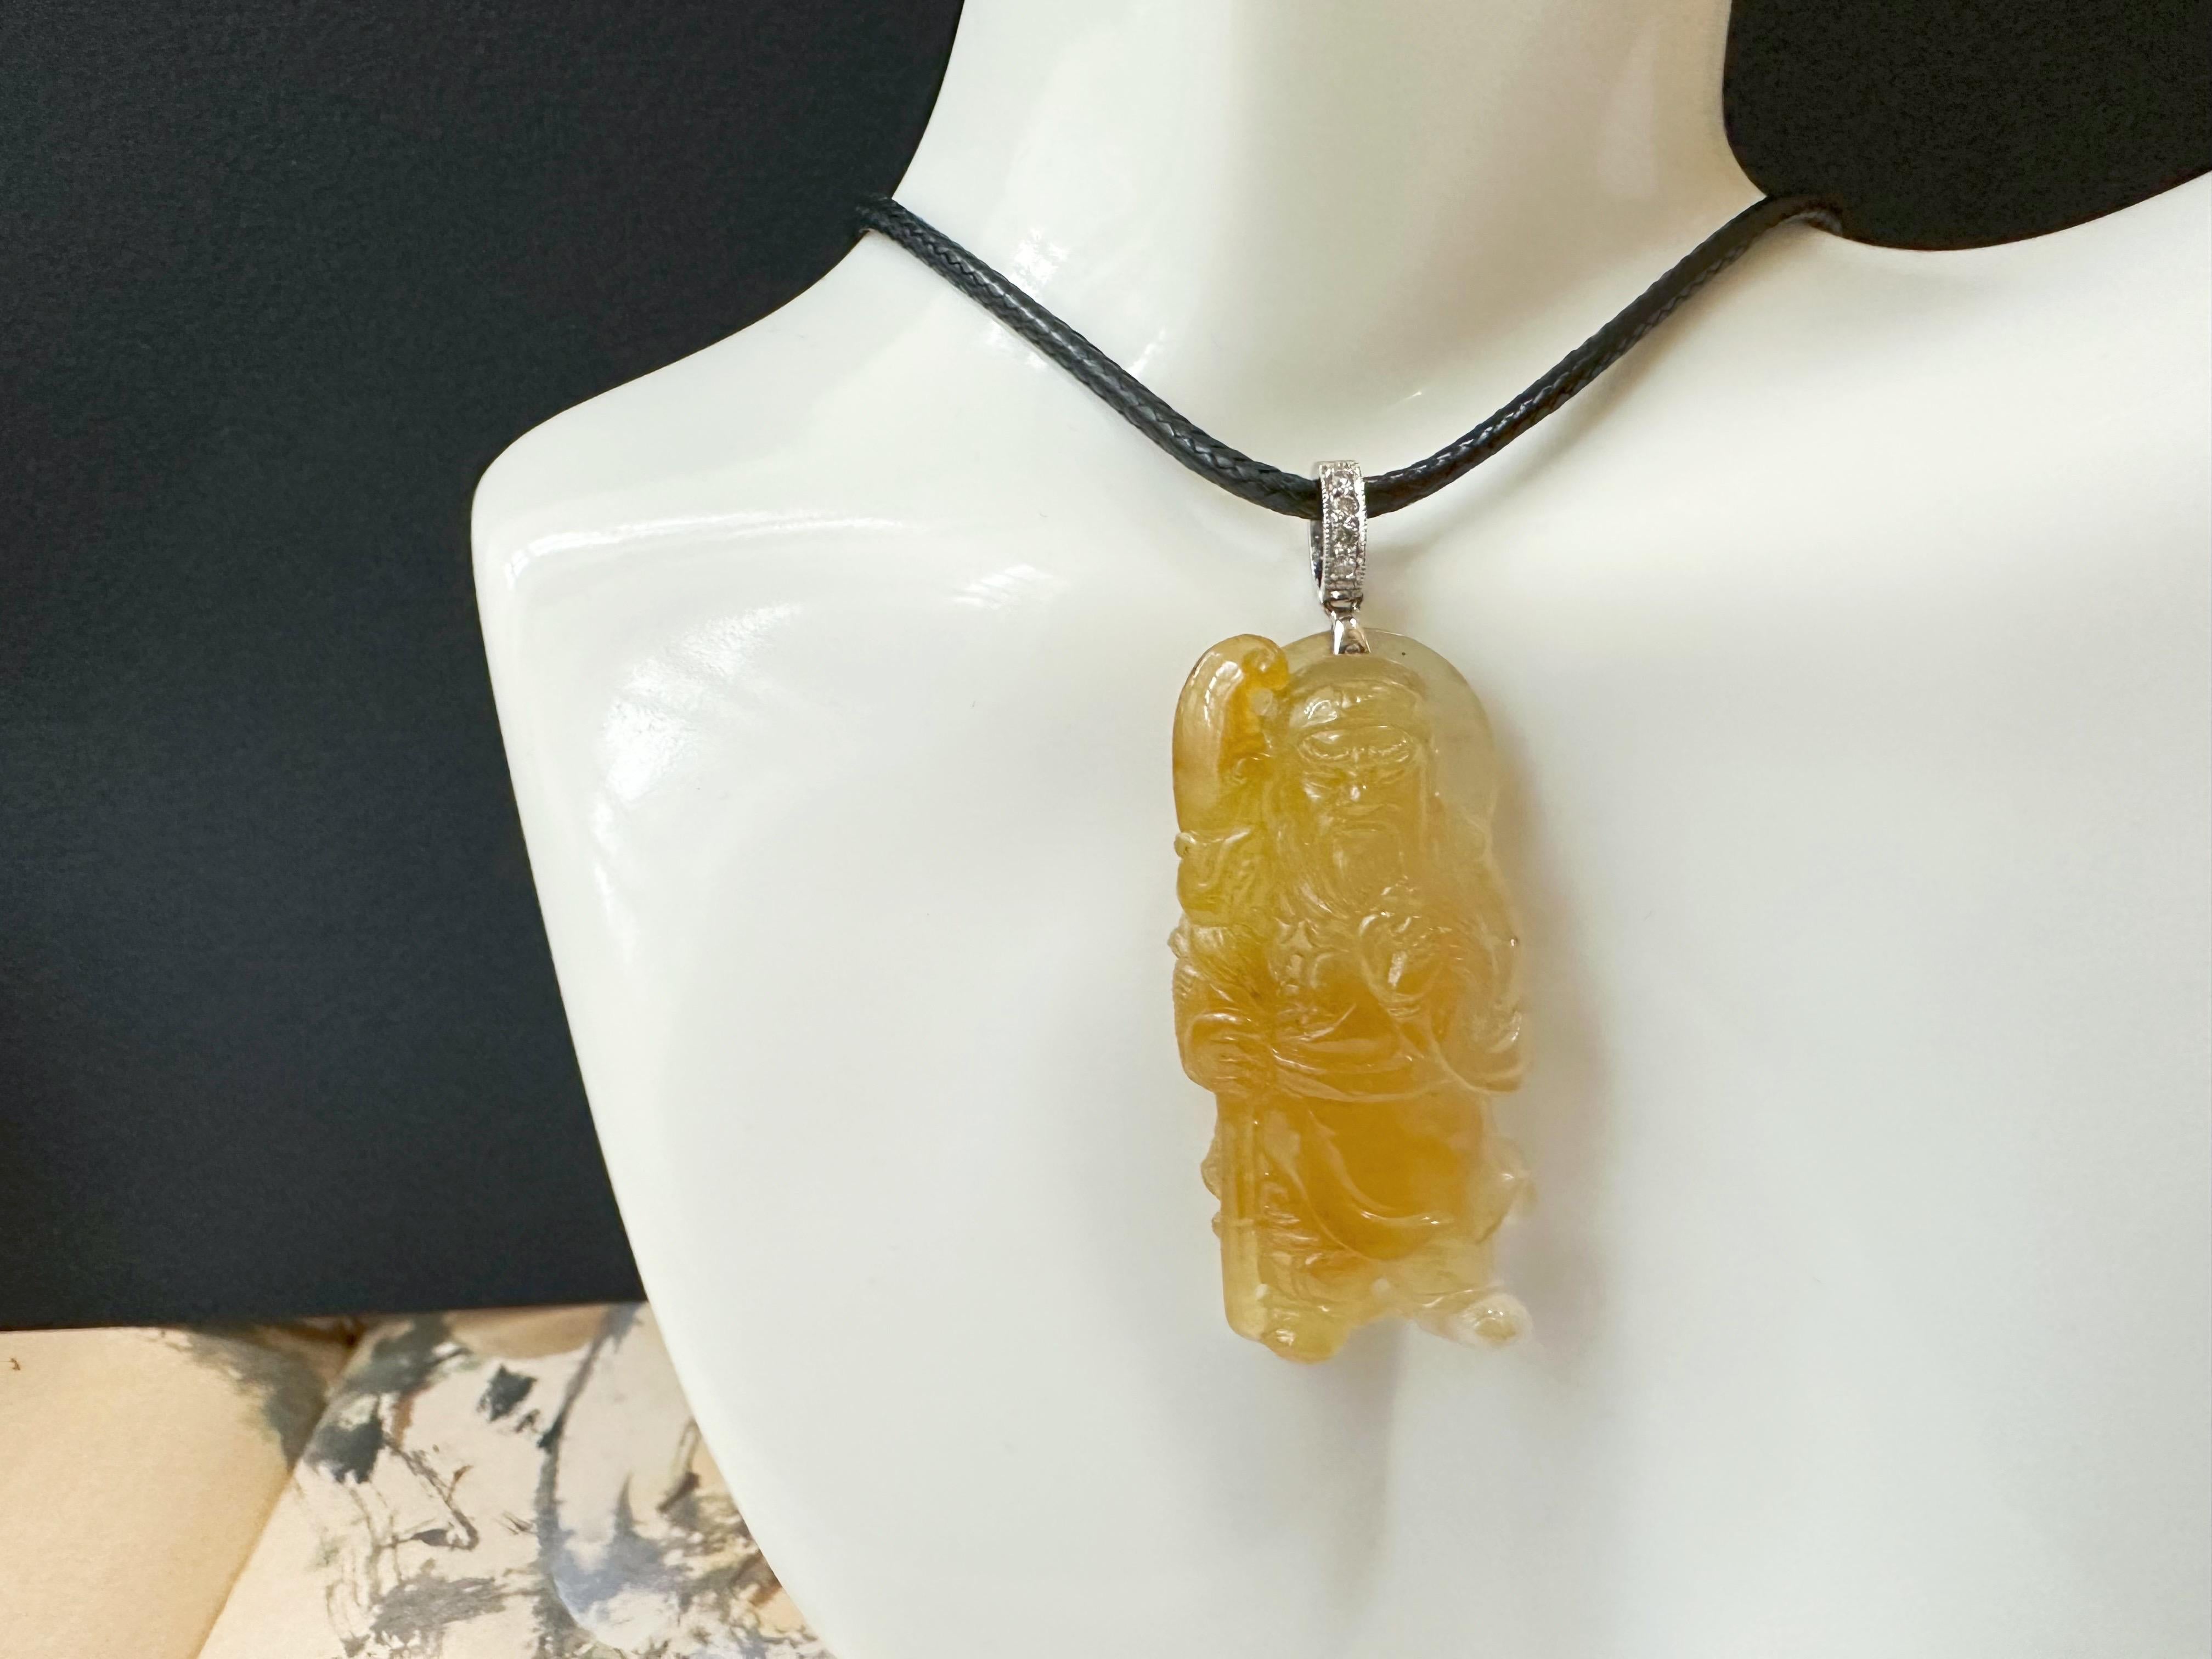 This jade pendant is 100% natural, untreated, and undyed Type-A Myanmar jadeite jade. It is hand-carved into a Guan Gong. The beautiful, fine, icy texture with honey-yellow color gifted by Mother Nature makes this pendant unique and attractive. This